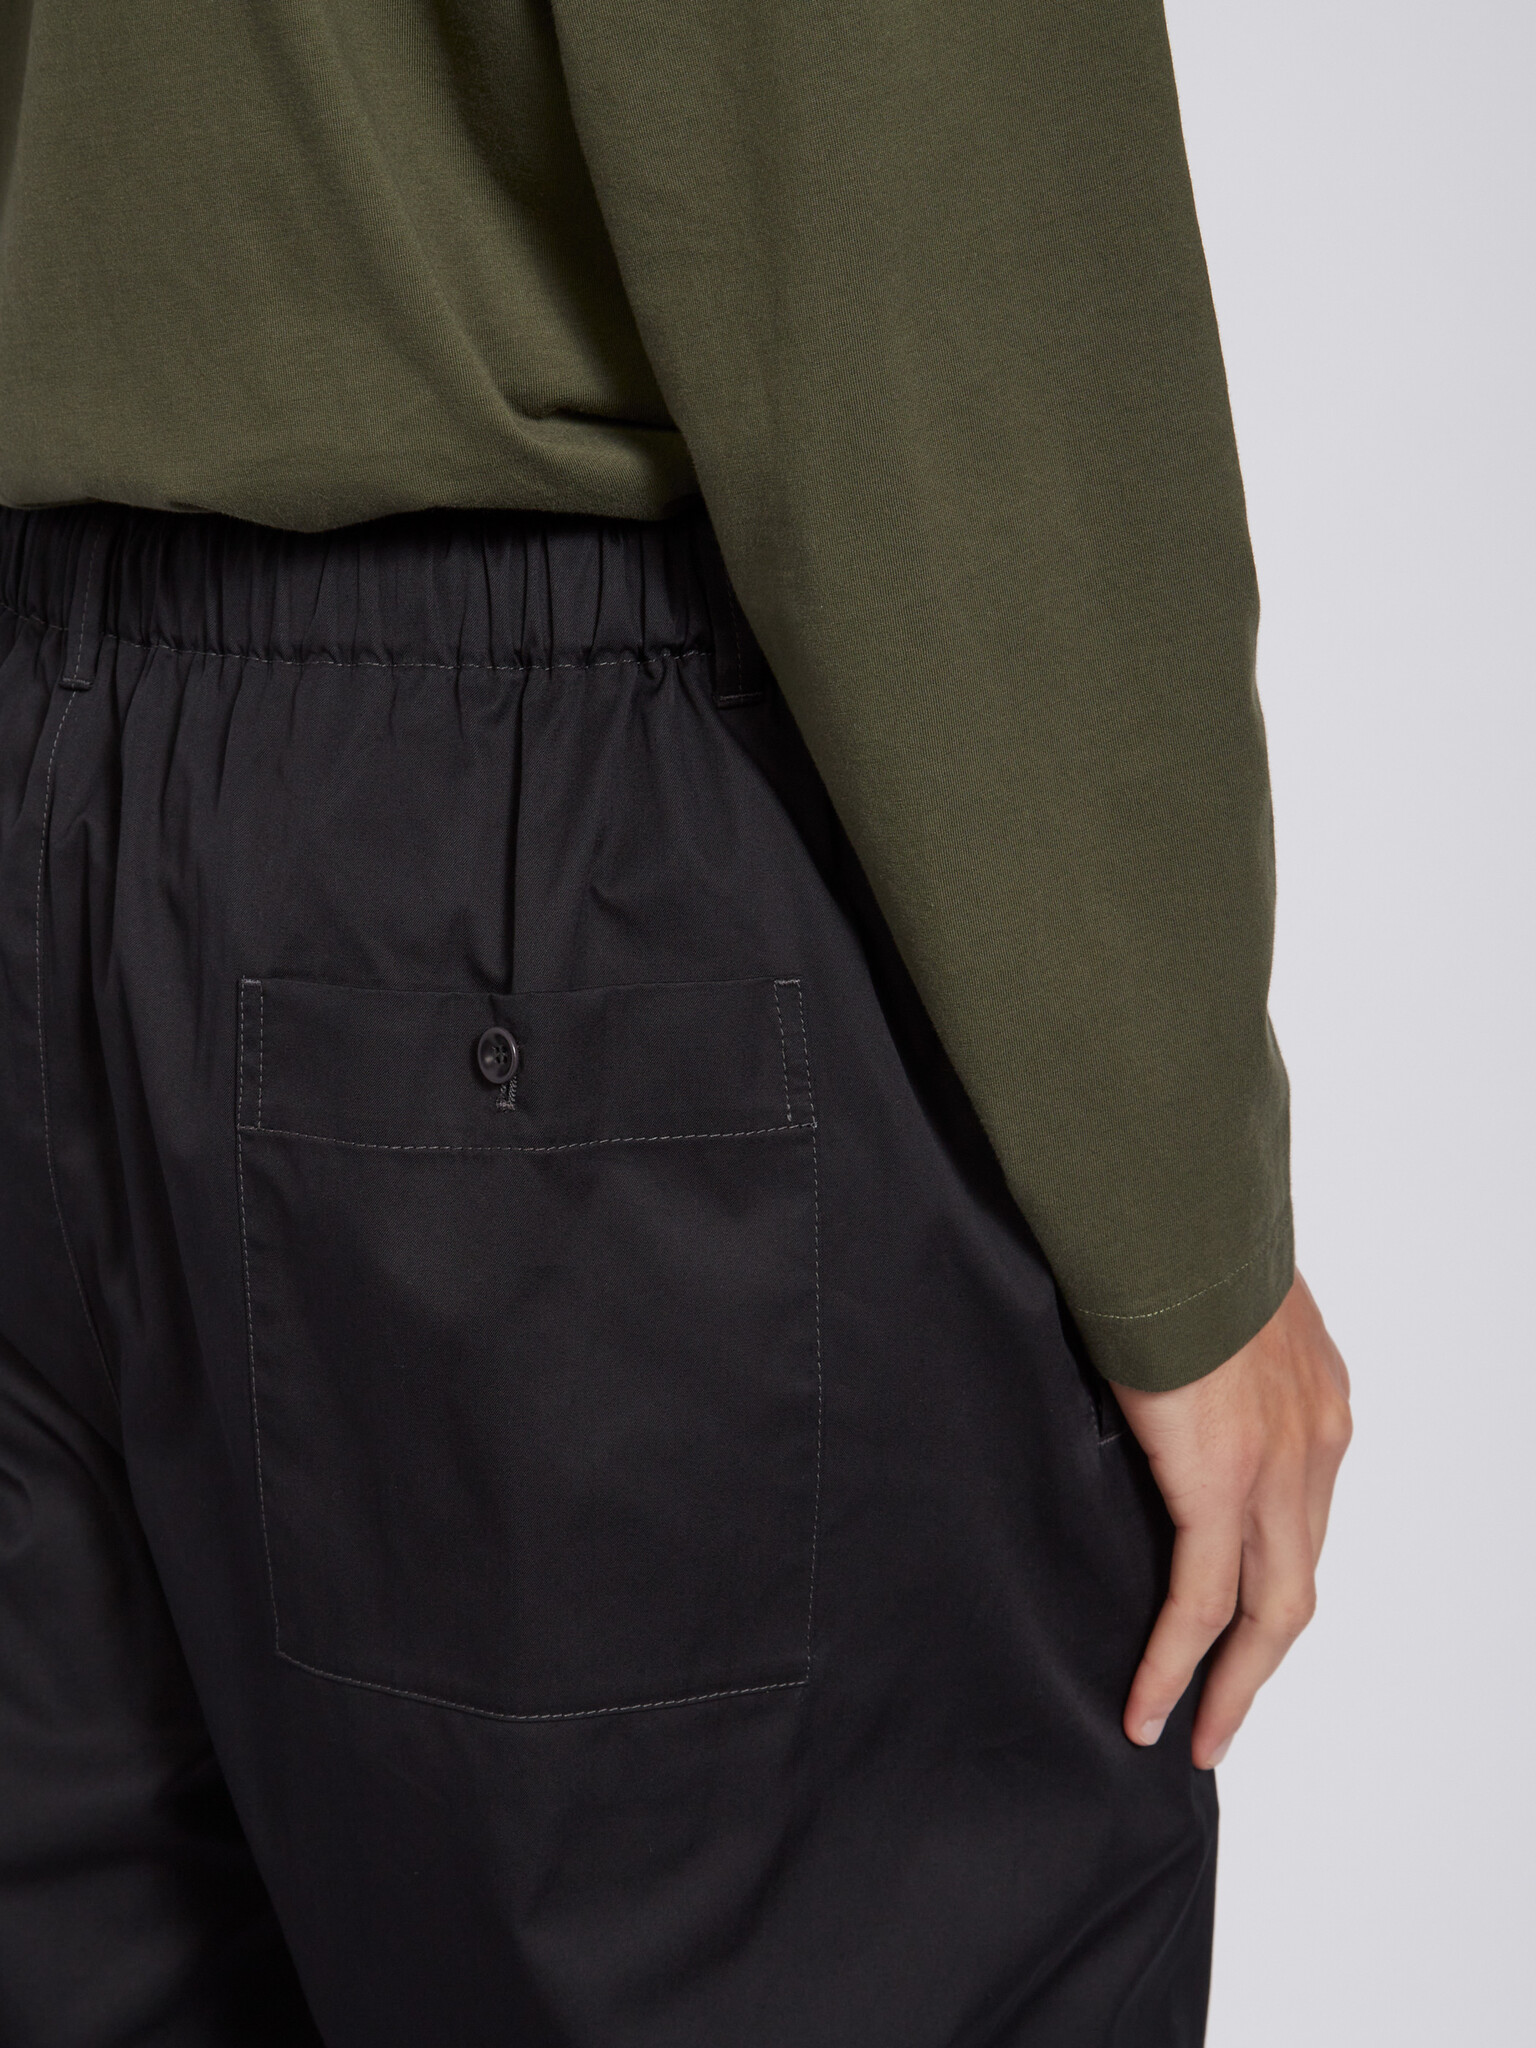 Lemaire mens lightweight Belted pants. L.$890